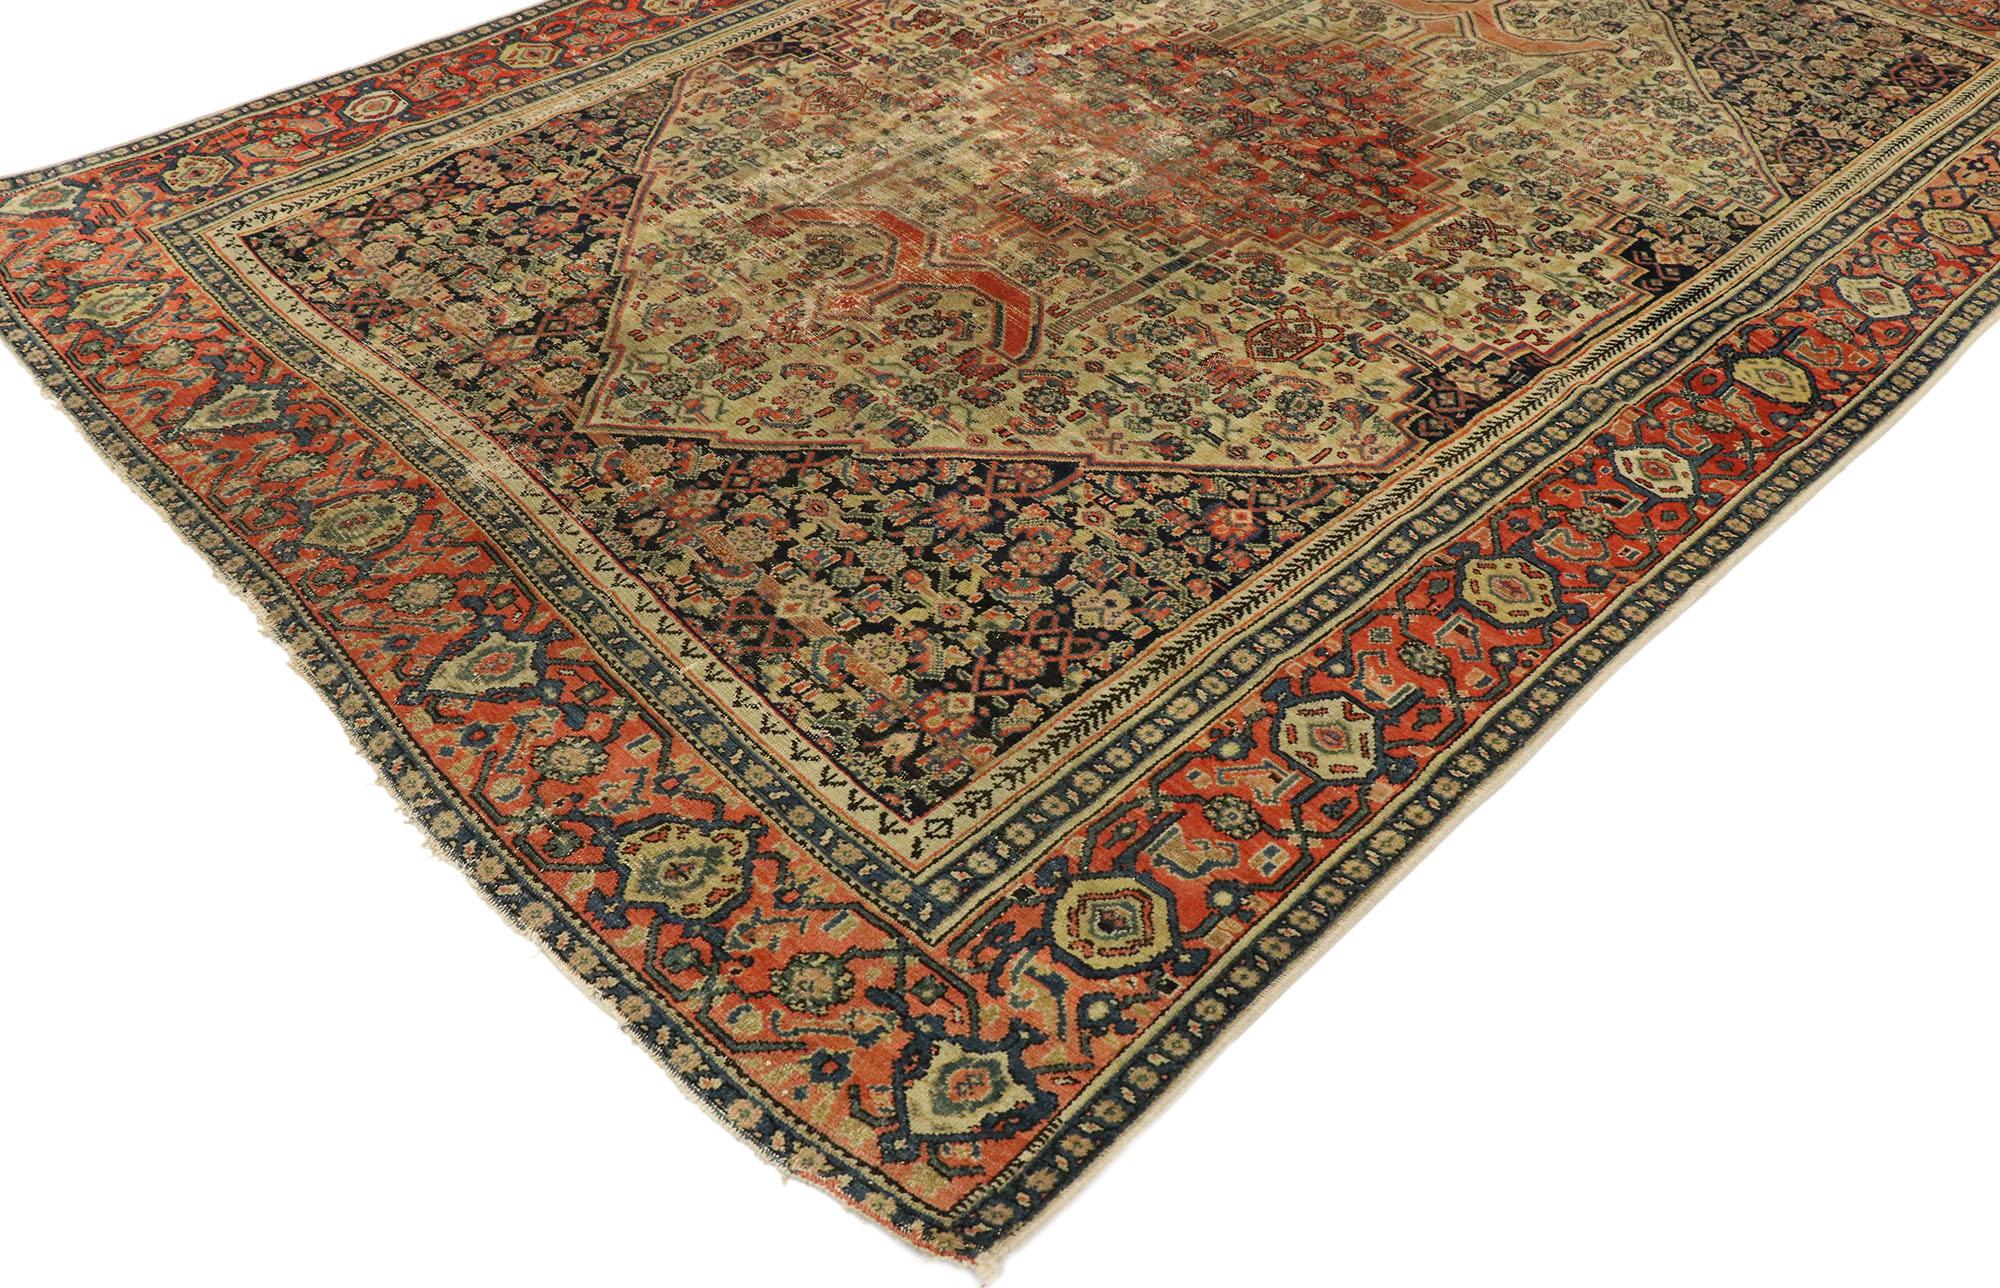 53141, distressed antique Persian Malayer rug with Modern Rustic Industrial style. With its perfectly worn-in charm and edgy elements, this distressed antique Malayer rug with Industrial style will create a warm, lived-in look and take on a curated